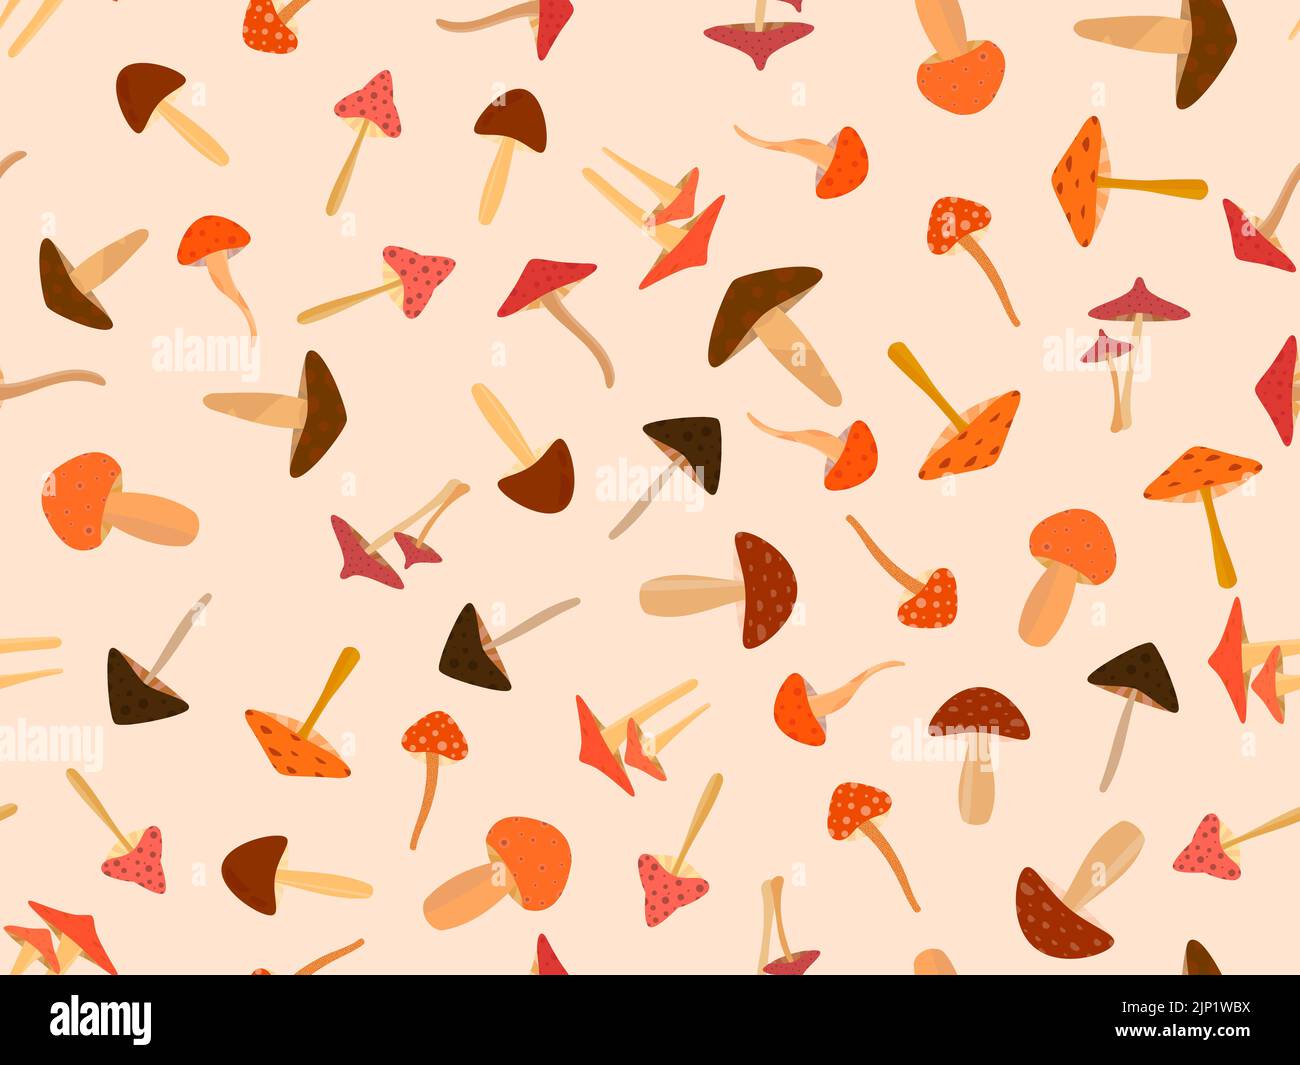 Mushrooms seamless pattern. Various mushrooms, edible and toadstools. Poisonous mushrooms and hallucinogenic fly agaric. Design for banners and promot Stock Vector